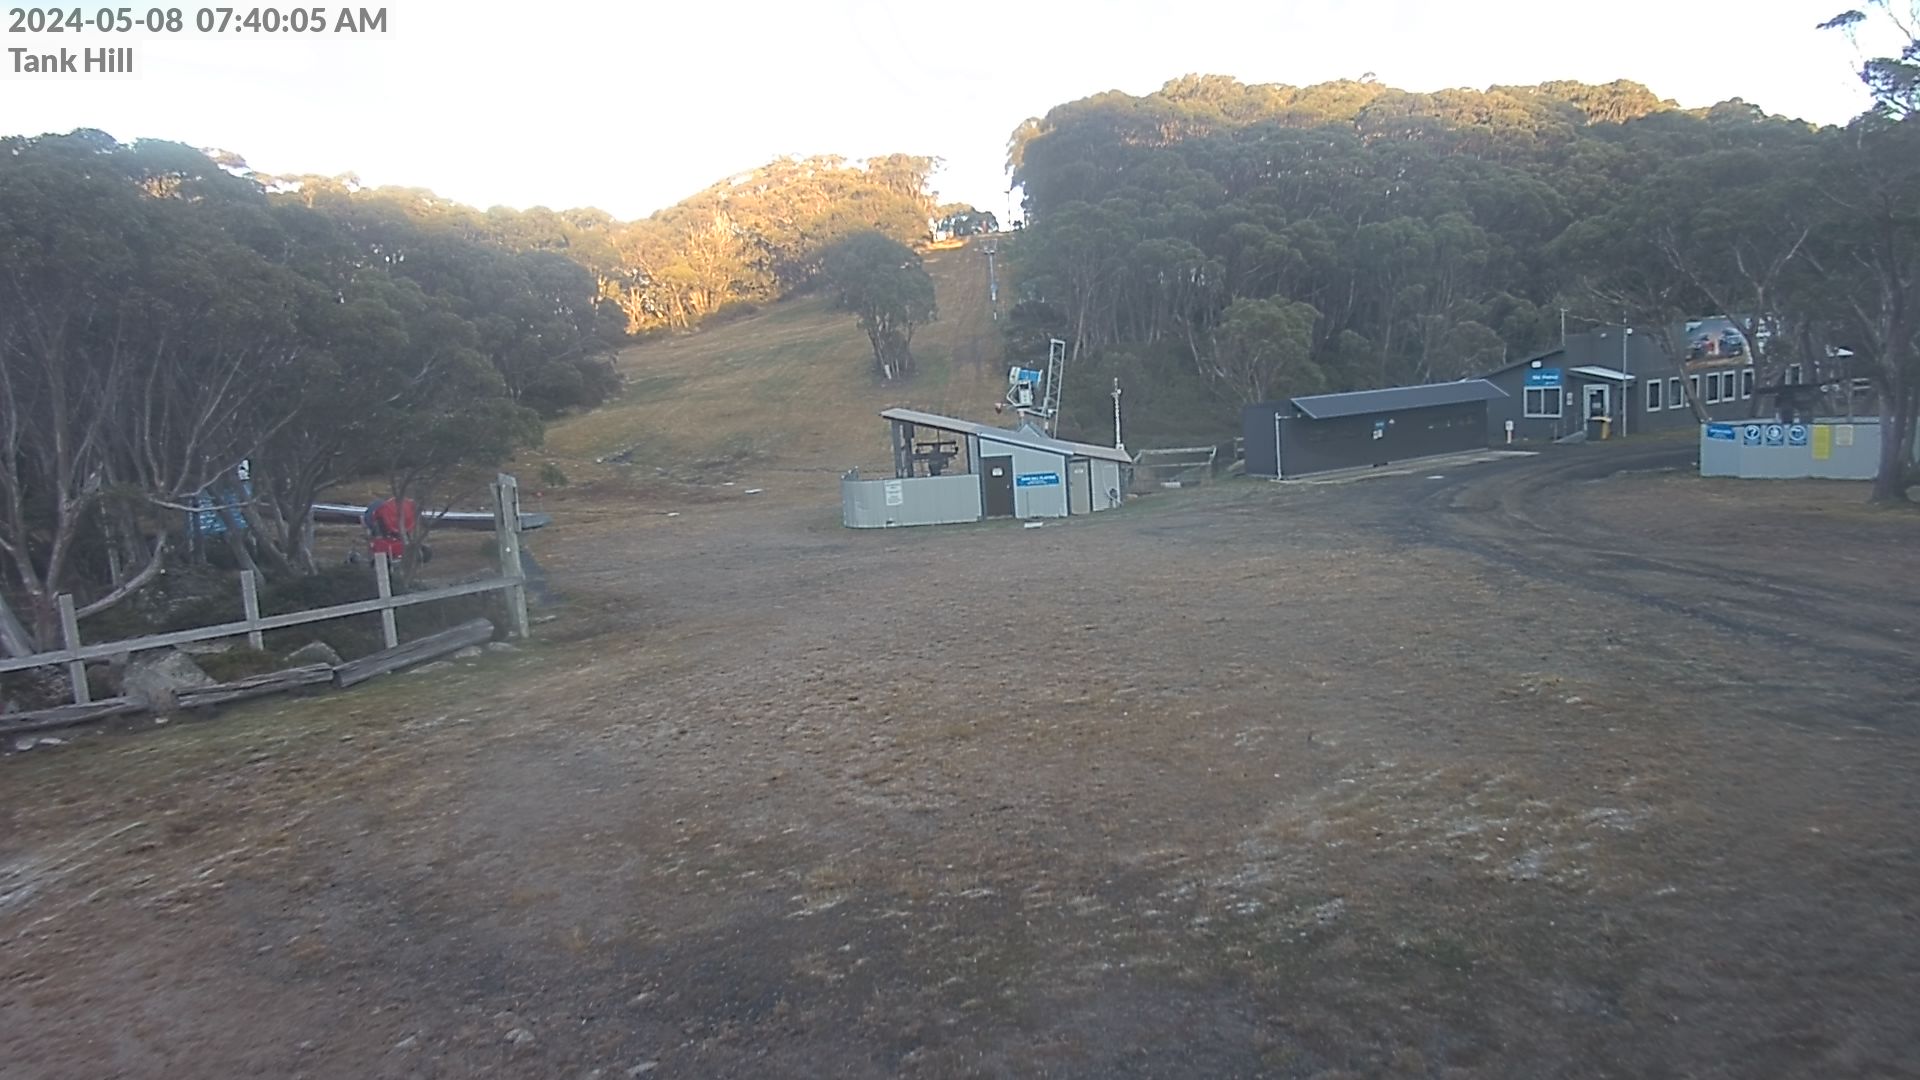 Mt Baw Baw Webcam for Tank Hill